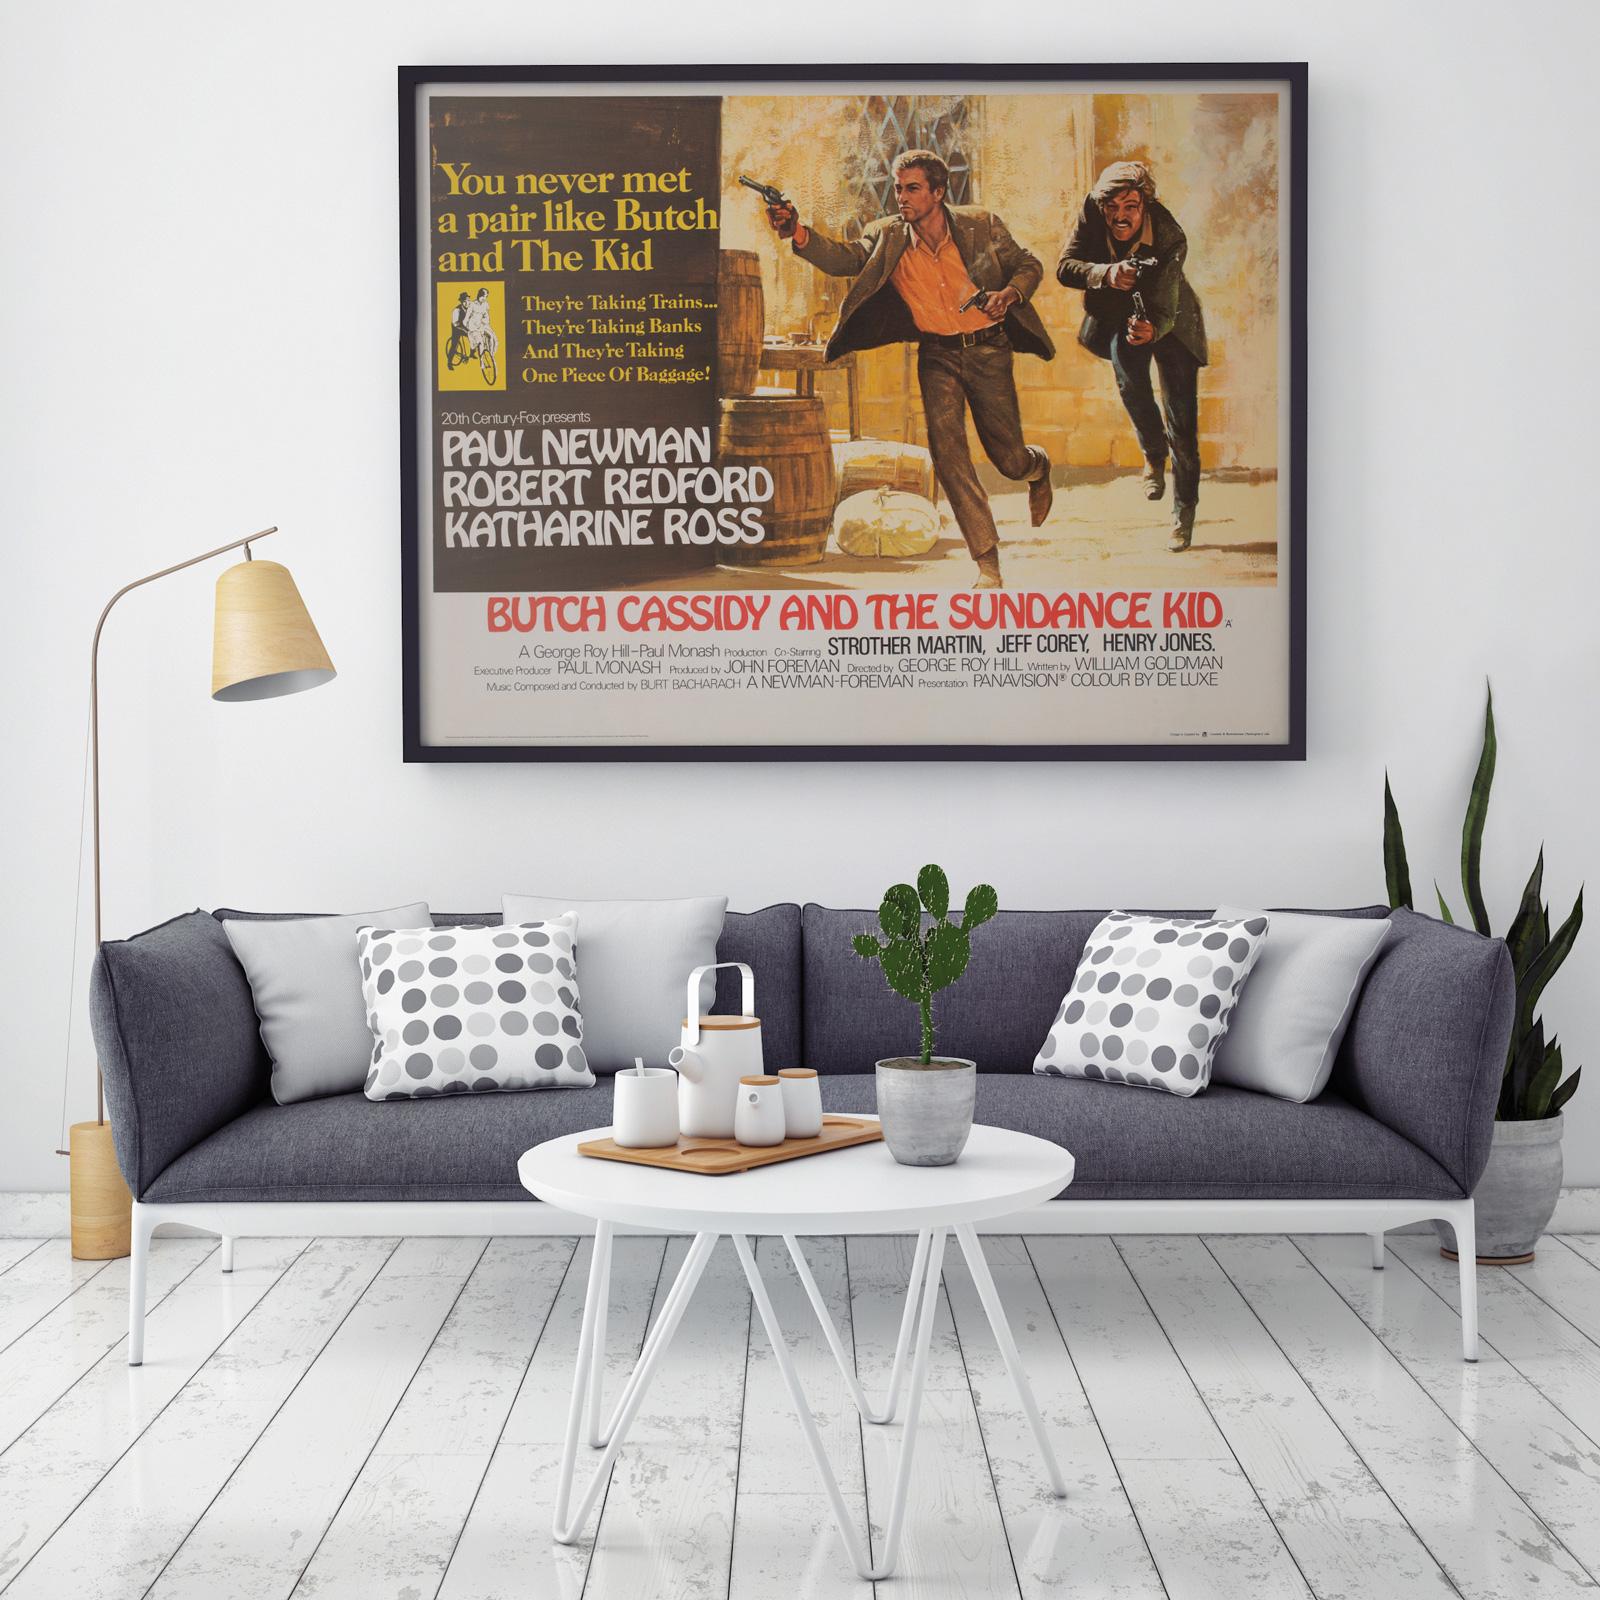 The UK Quad for the much loved classic Butch Cassidy and the Sundance Kid features some of the strongest artwork for the title. Very collectible poster in fantastic condition.

This vintage movie poster has been professionally linen-backed and is